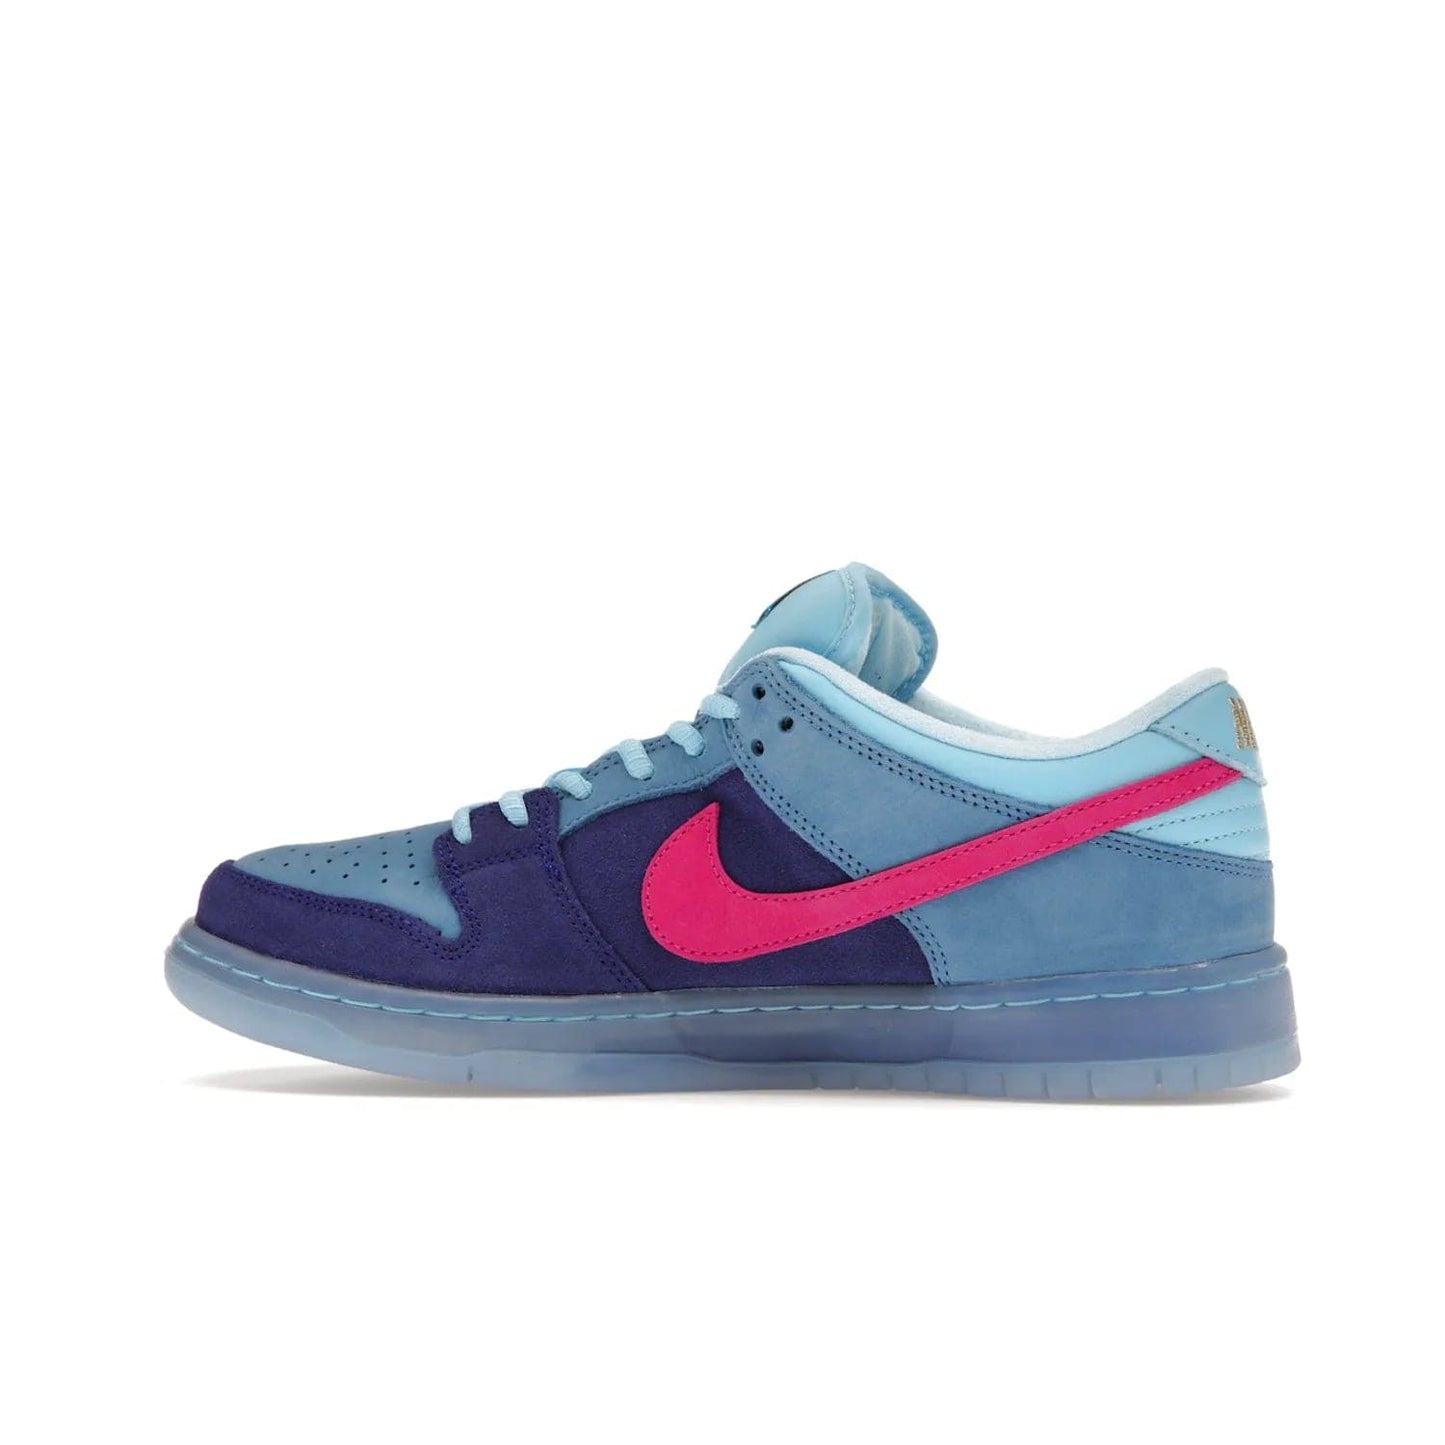 Nike SB Dunk Low Run The Jewels - Image 20 - Only at www.BallersClubKickz.com - The Nike SB Dunk Low Run The Jewels pays tribute to the Run the Jewels 3 album cover. It features a blue suede upper with pink suede accents, gold branding and 3 lace sets. RTJ insoles complete this limited edition sneaker. Get it now for your shoe collection.